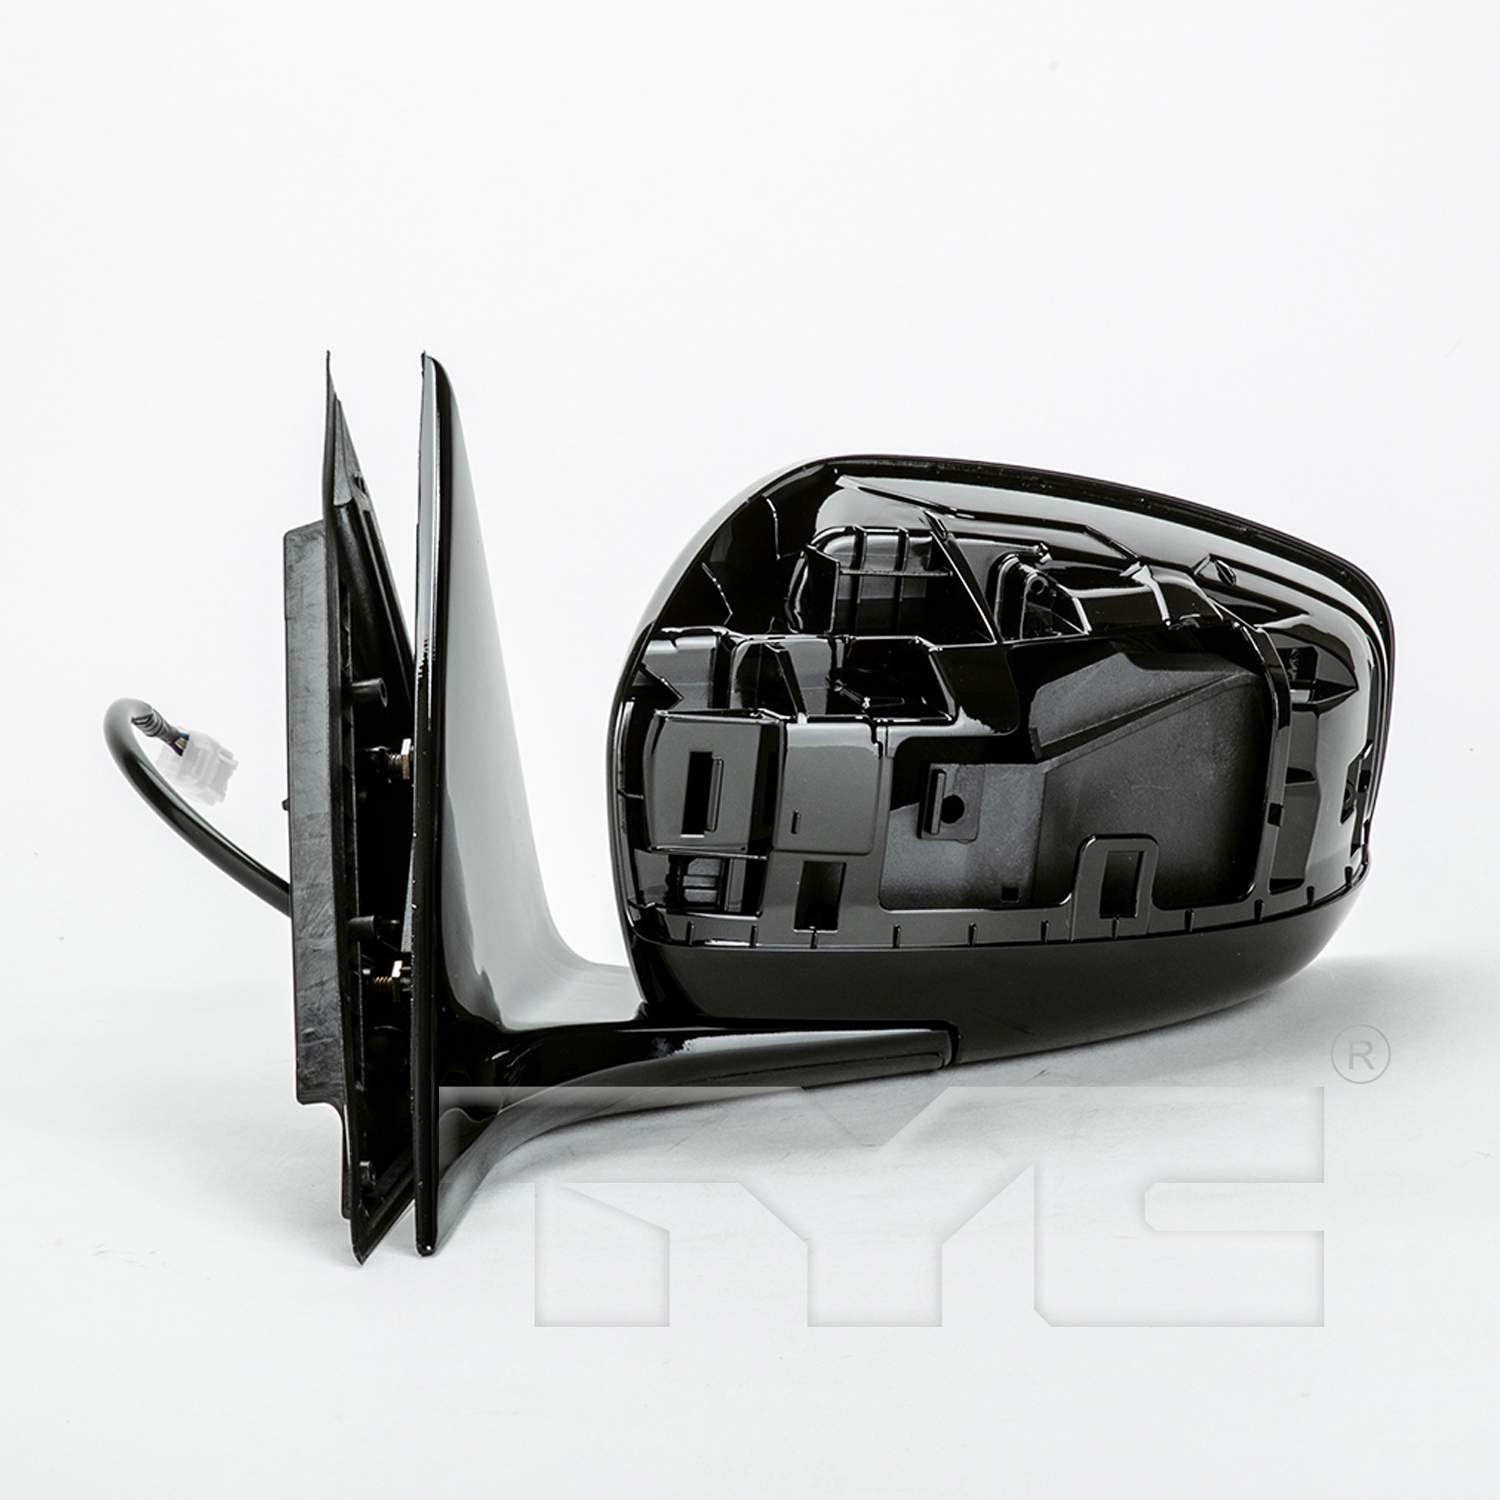 Aftermarket MIRRORS for INFINITI - G37, G37,09-13,LT Mirror outside rear view